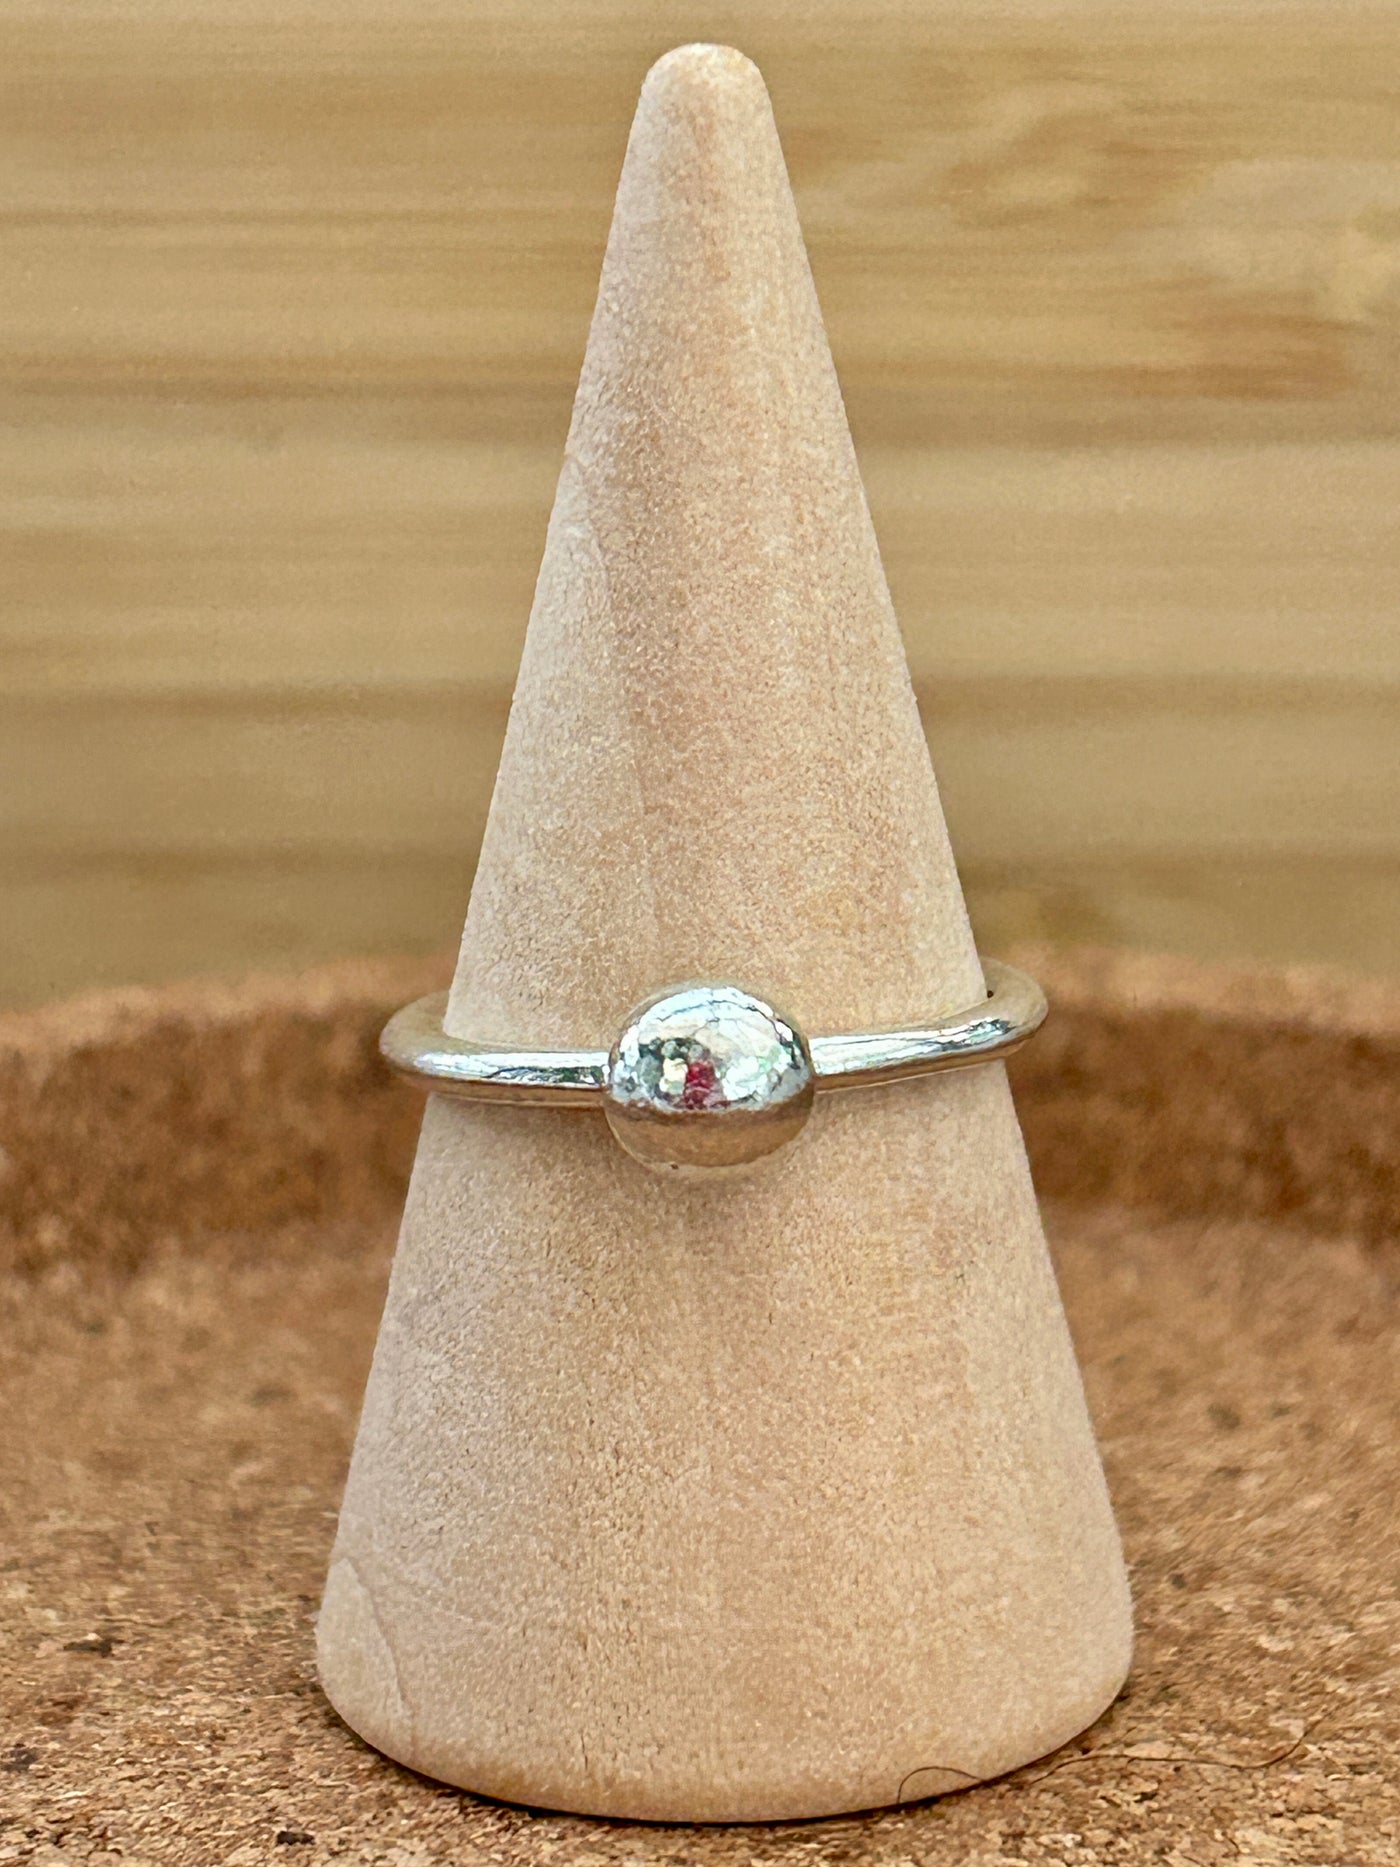 Silver bauble ring shown on a wooden cone